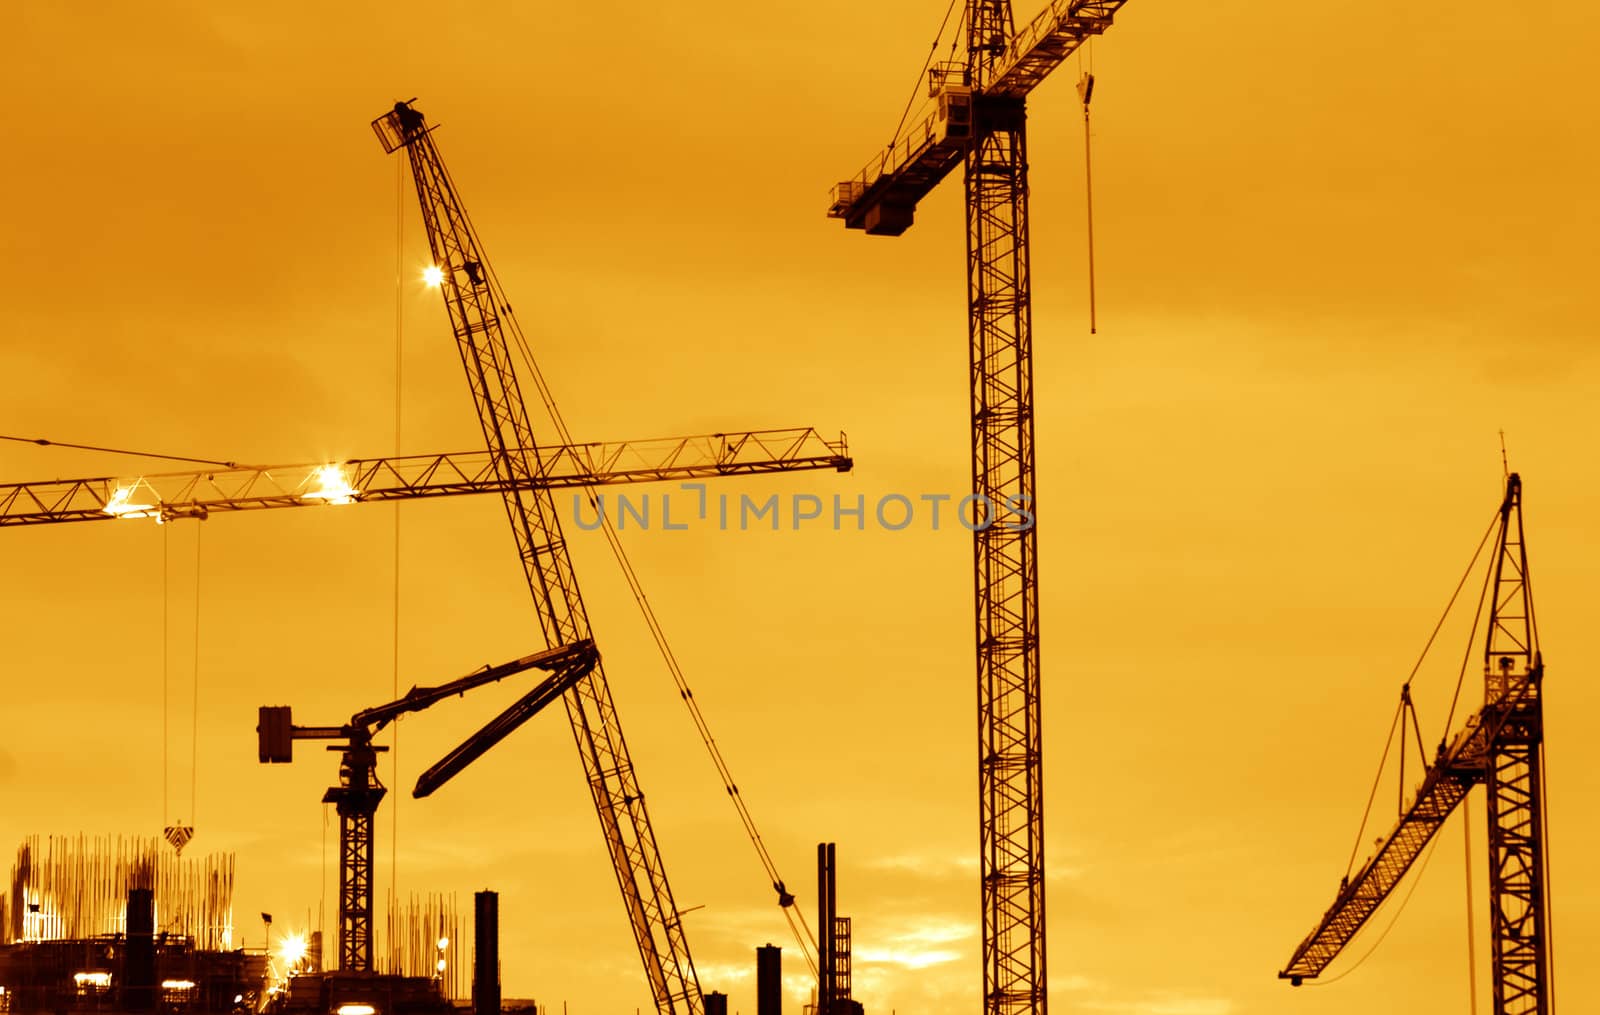 Building Construction with Cranes in the evening.